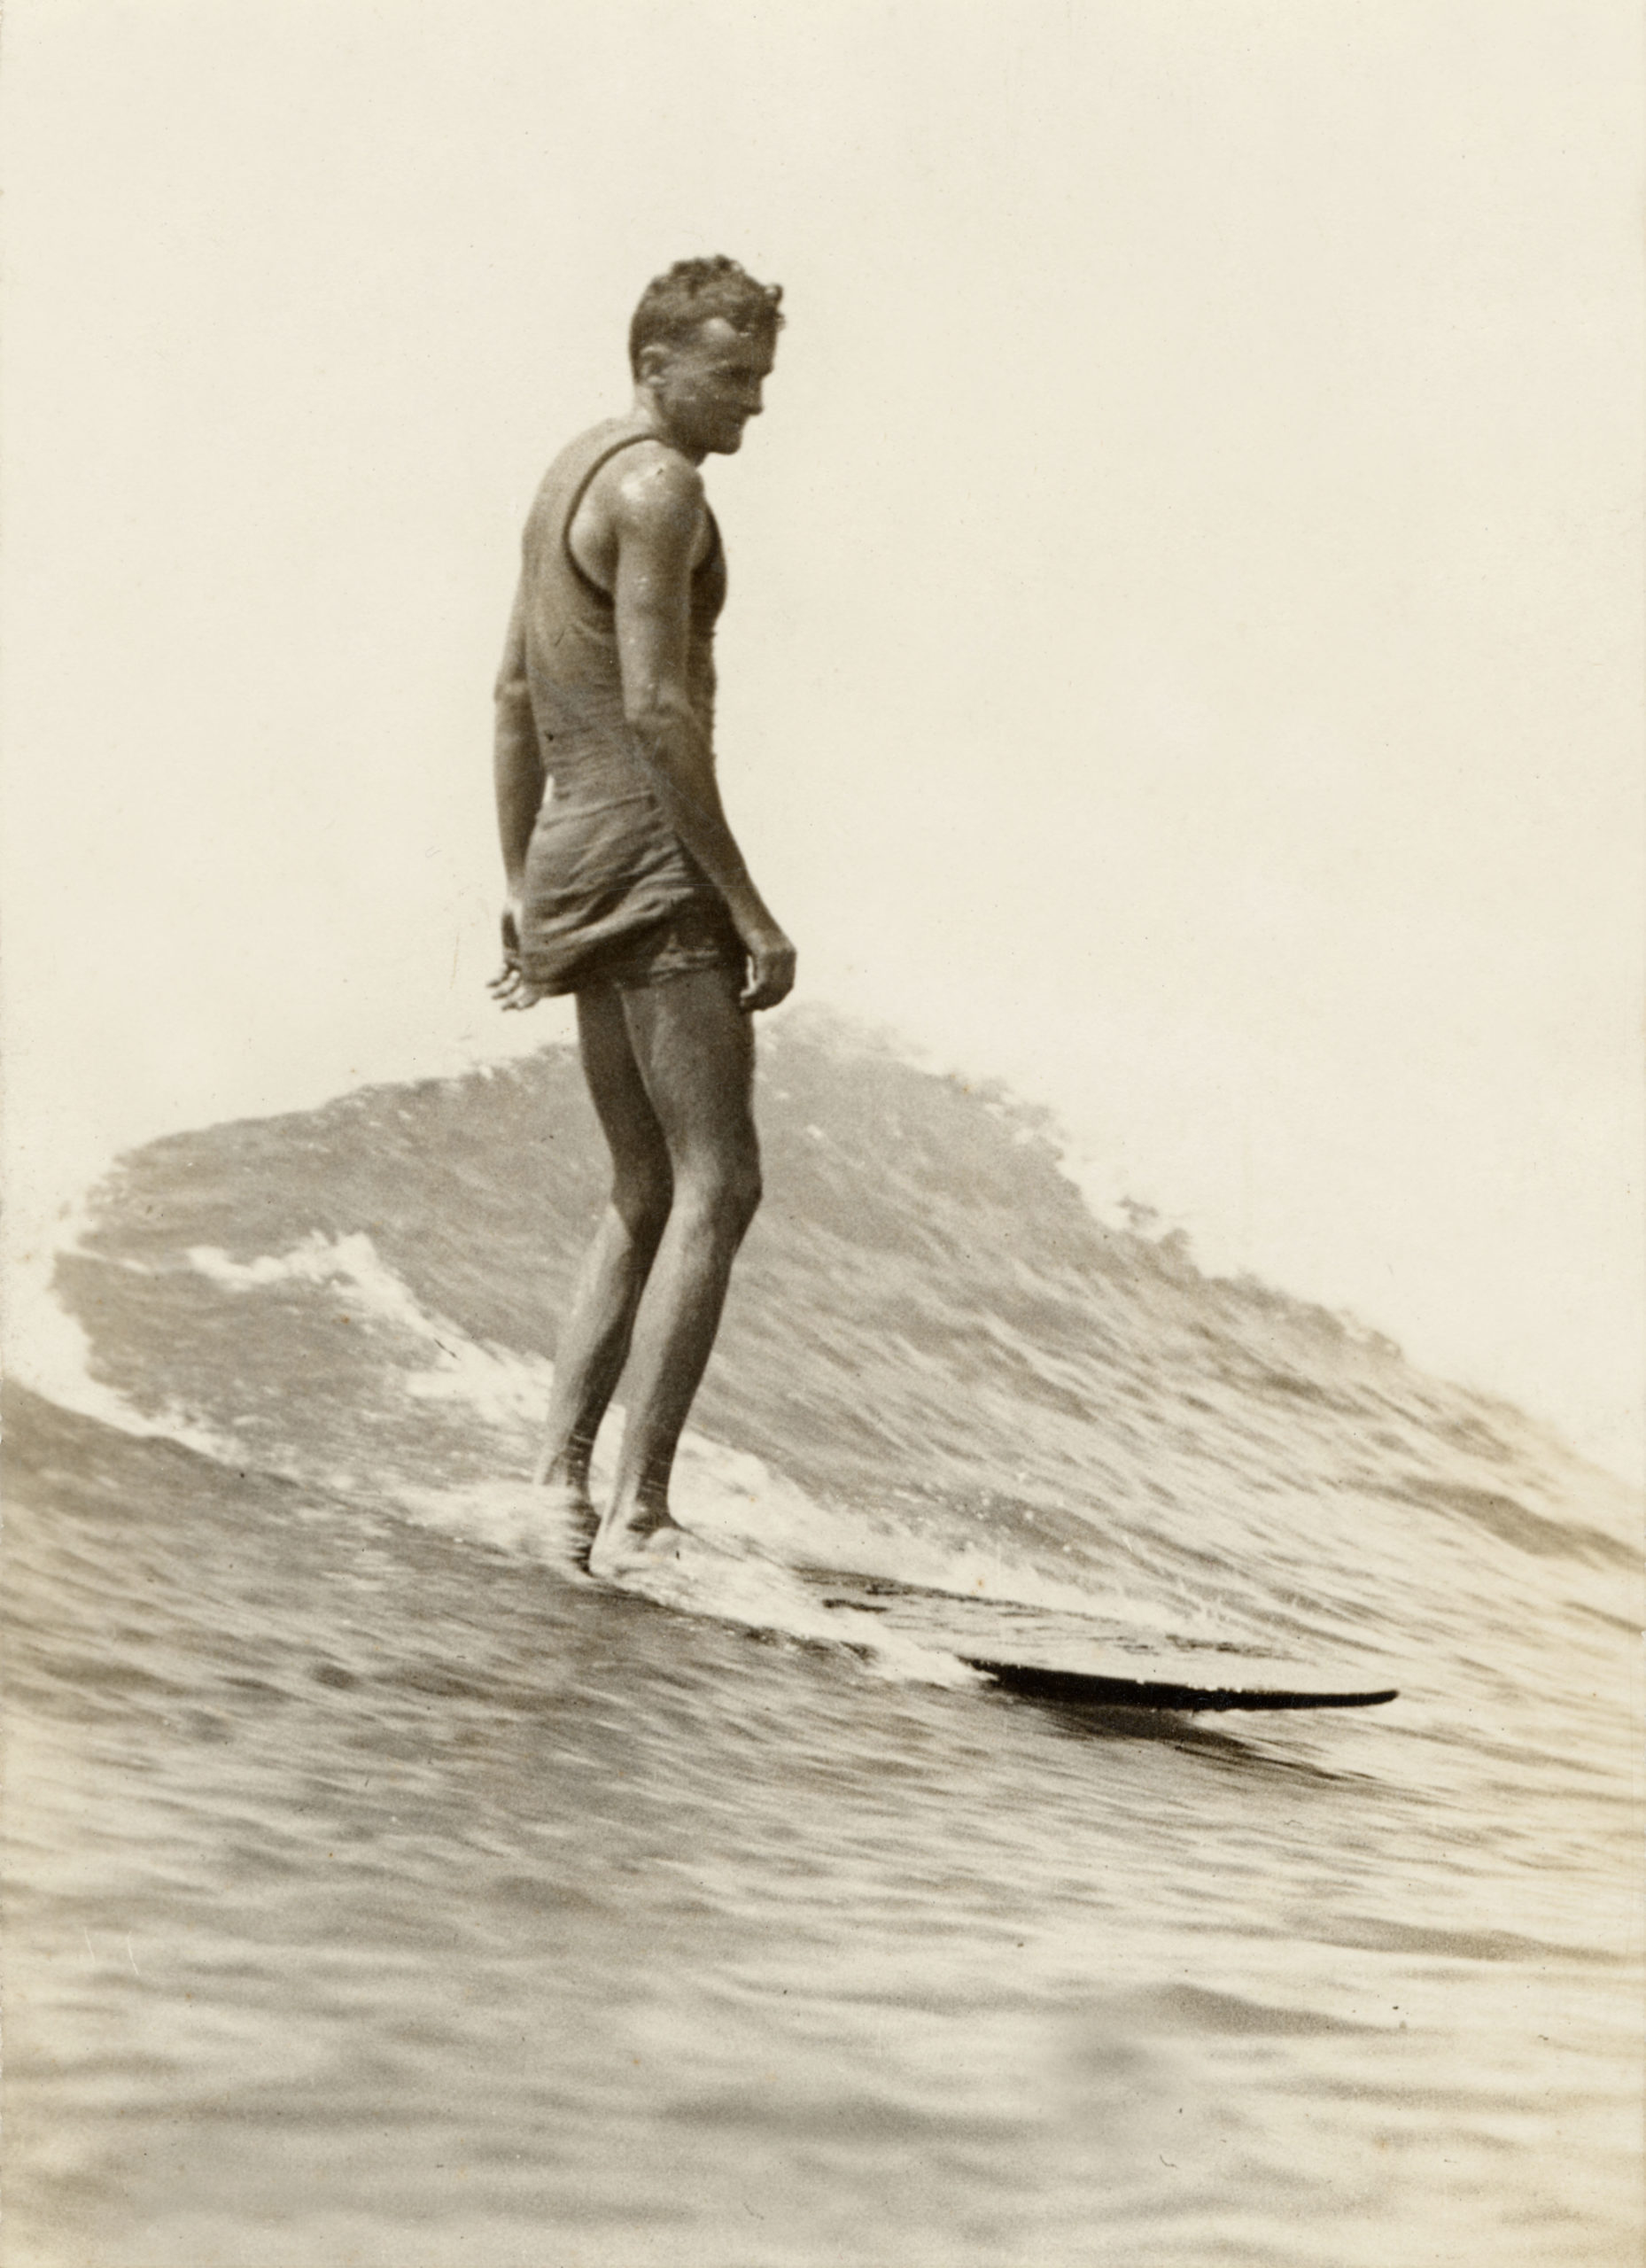 a man surfs in the 1920s